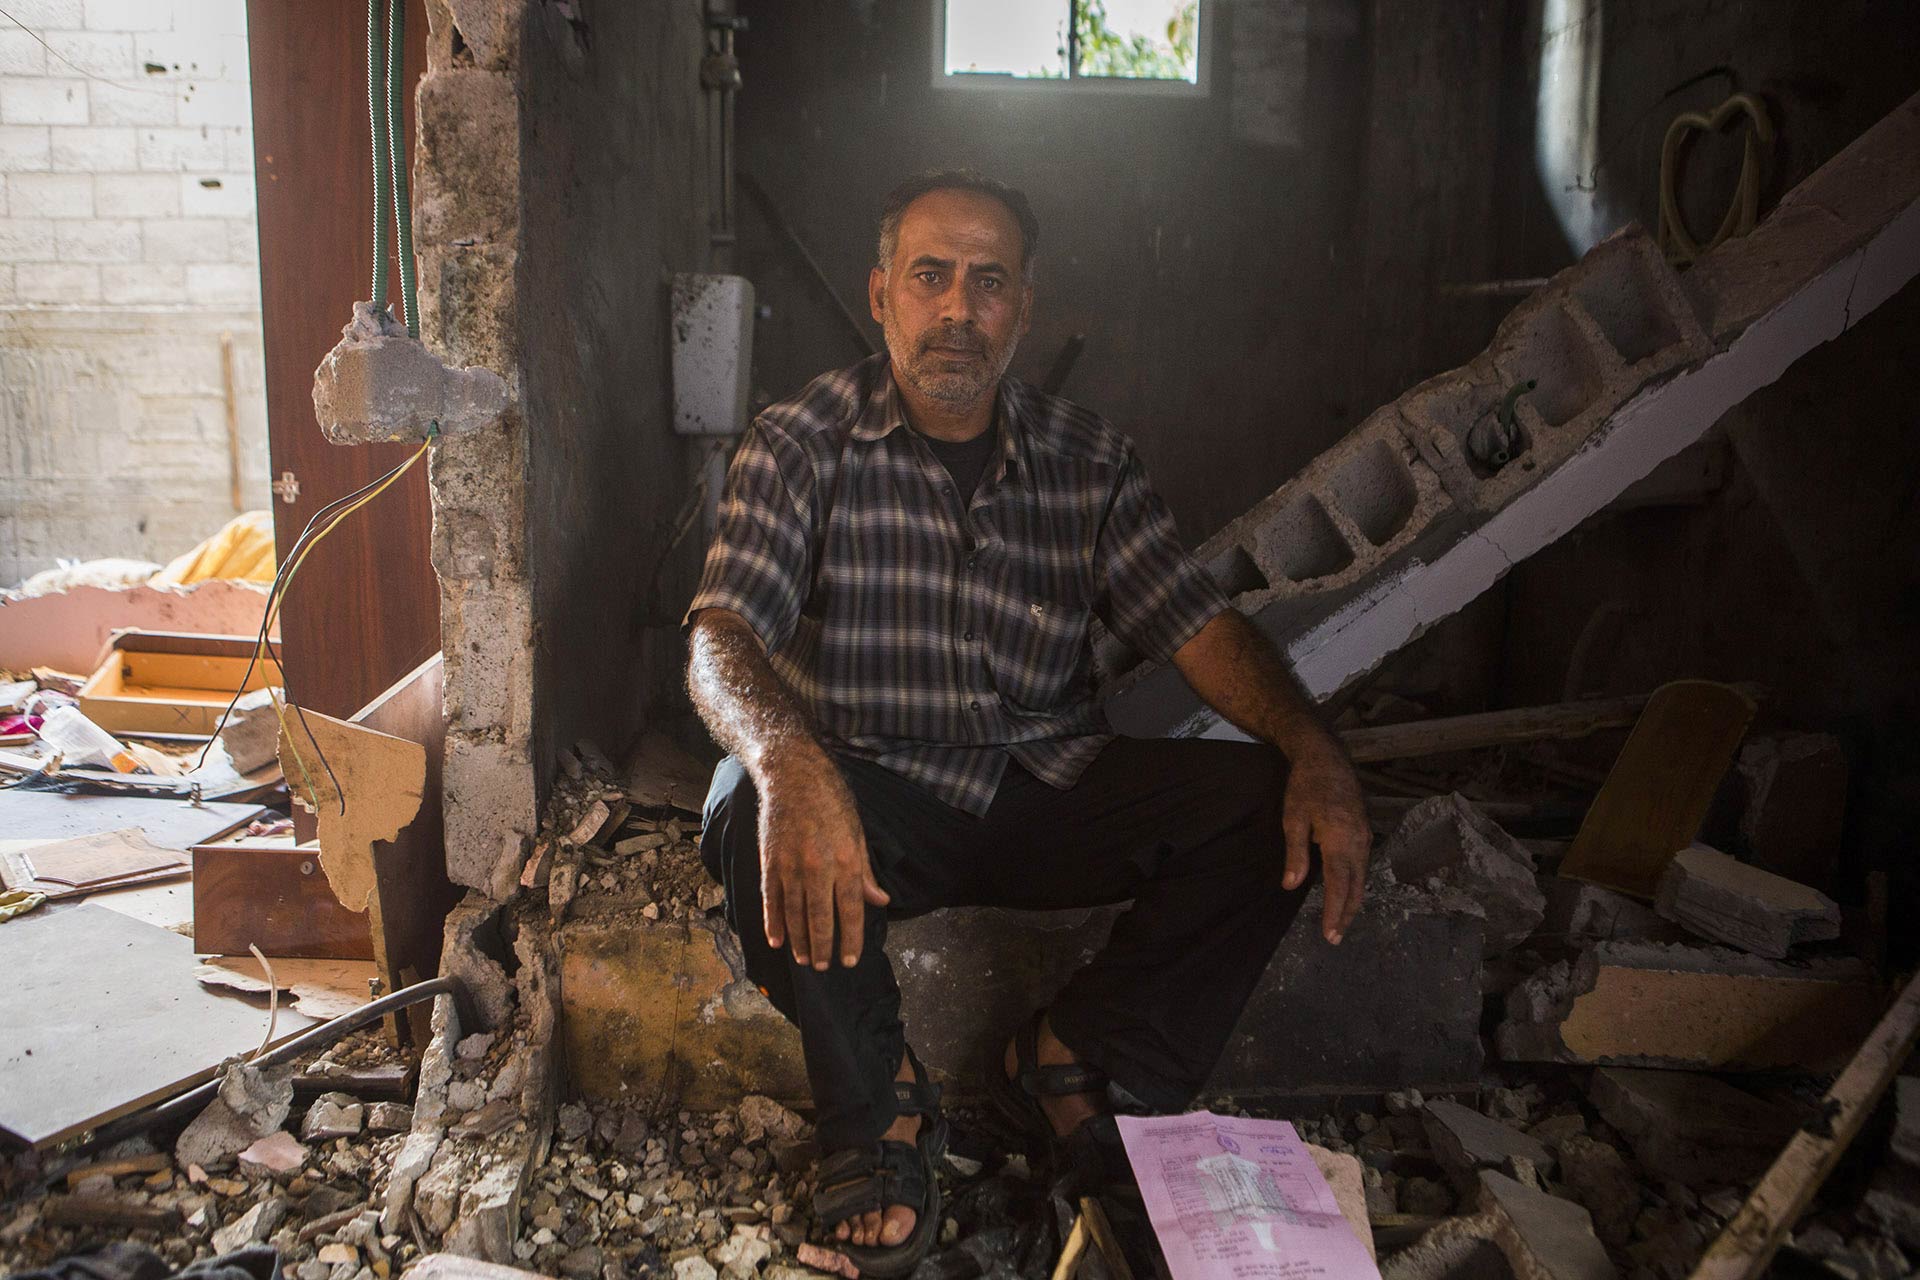 “We are homeless now. I demand justice, I demand that an international court hold Israel accountable, because they murdered our family, with no warning. All I want is to find a prosecutor who will take this case, but no one is looking into it,” Abdelkarim says.
